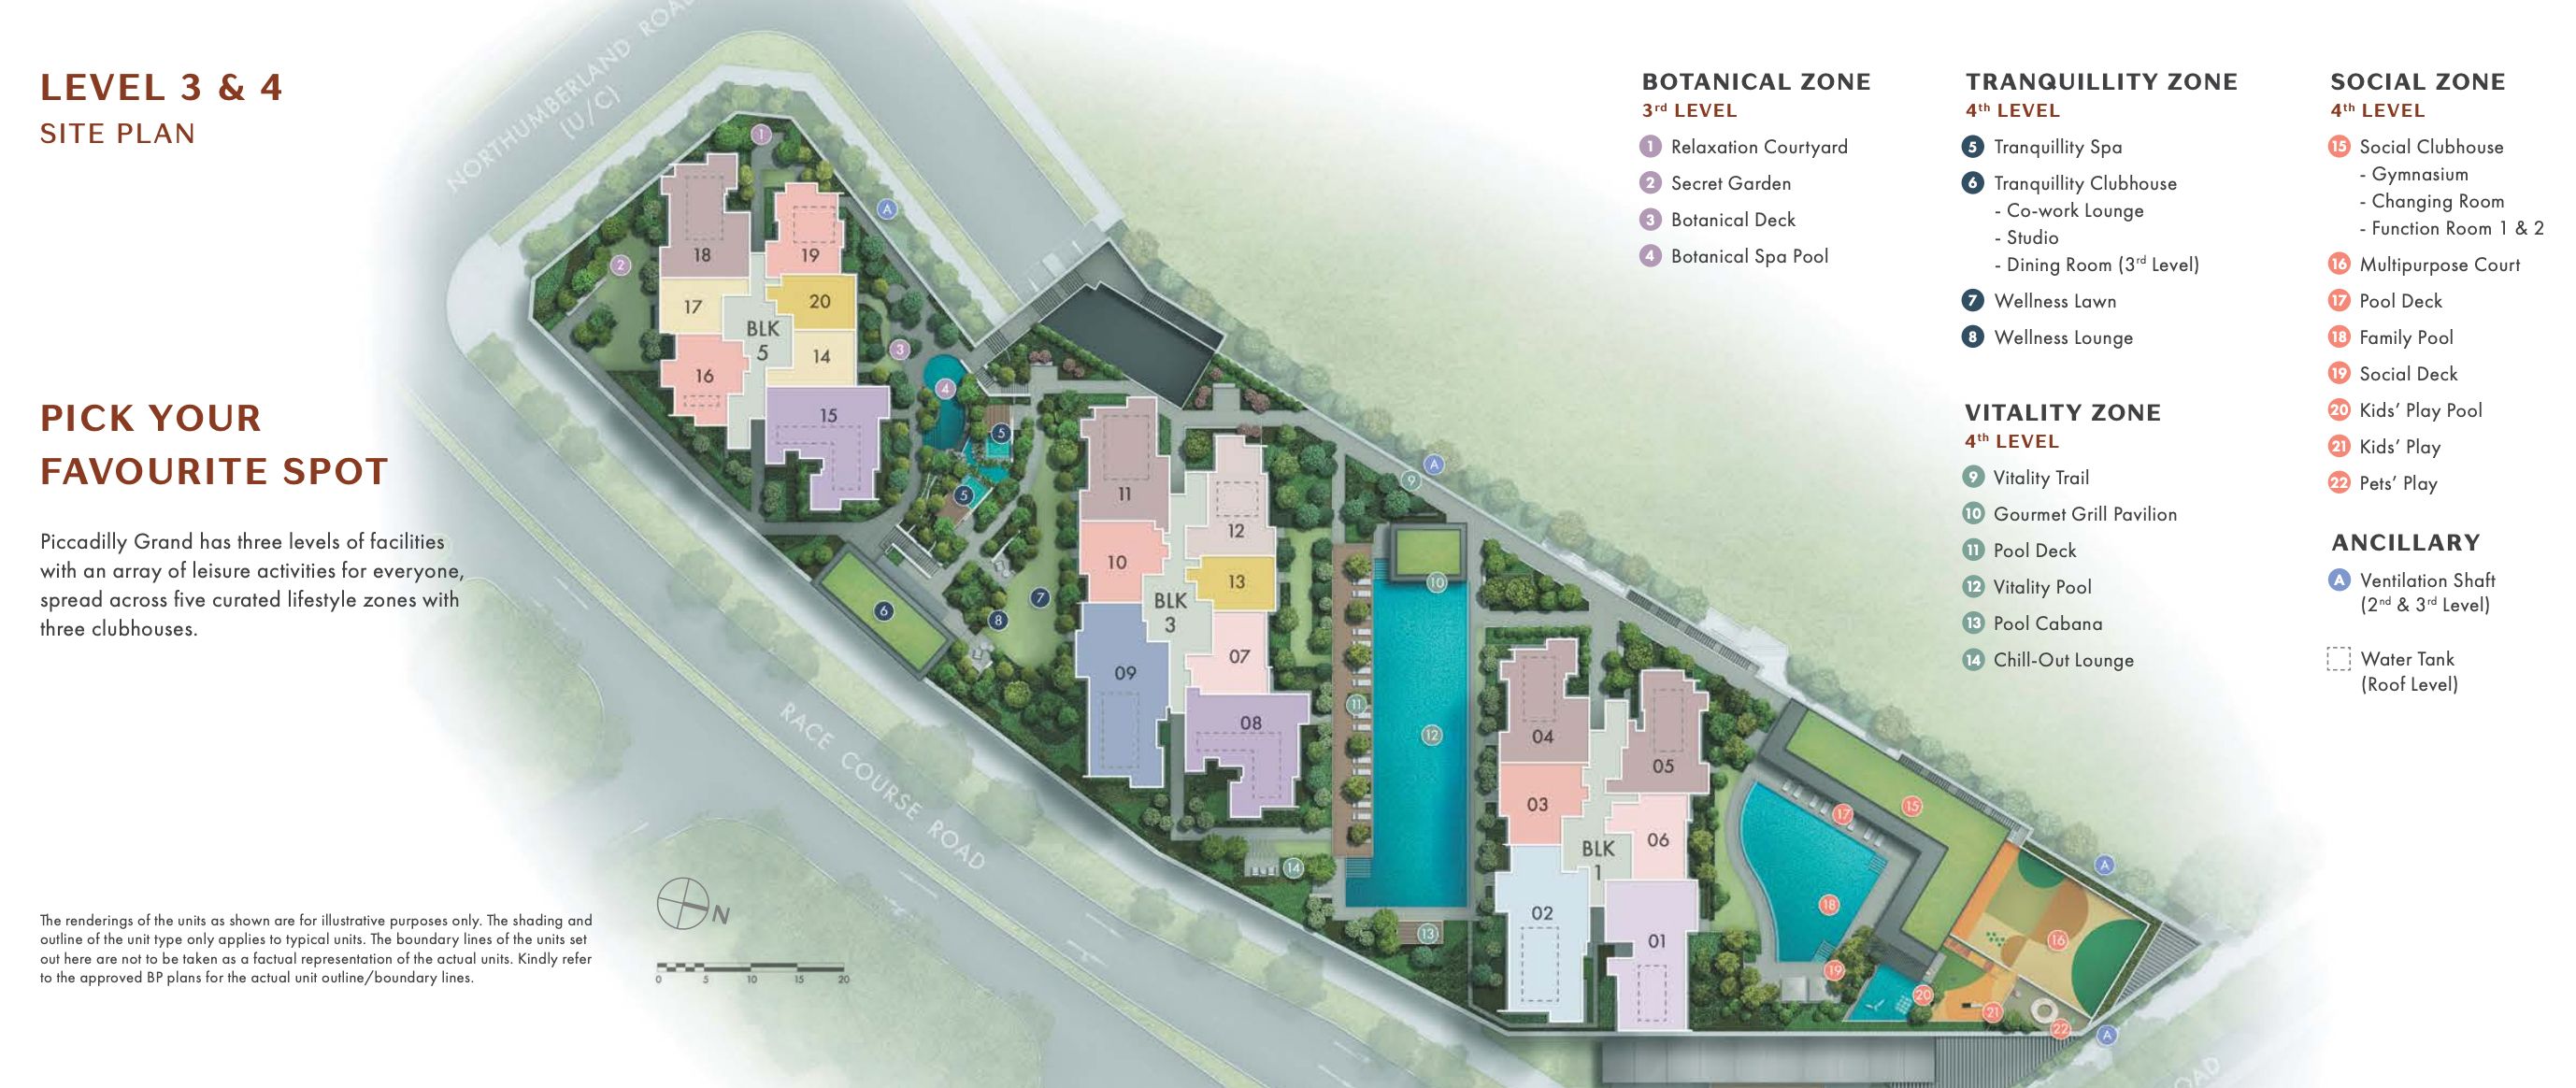 piccadilly grand siteplan